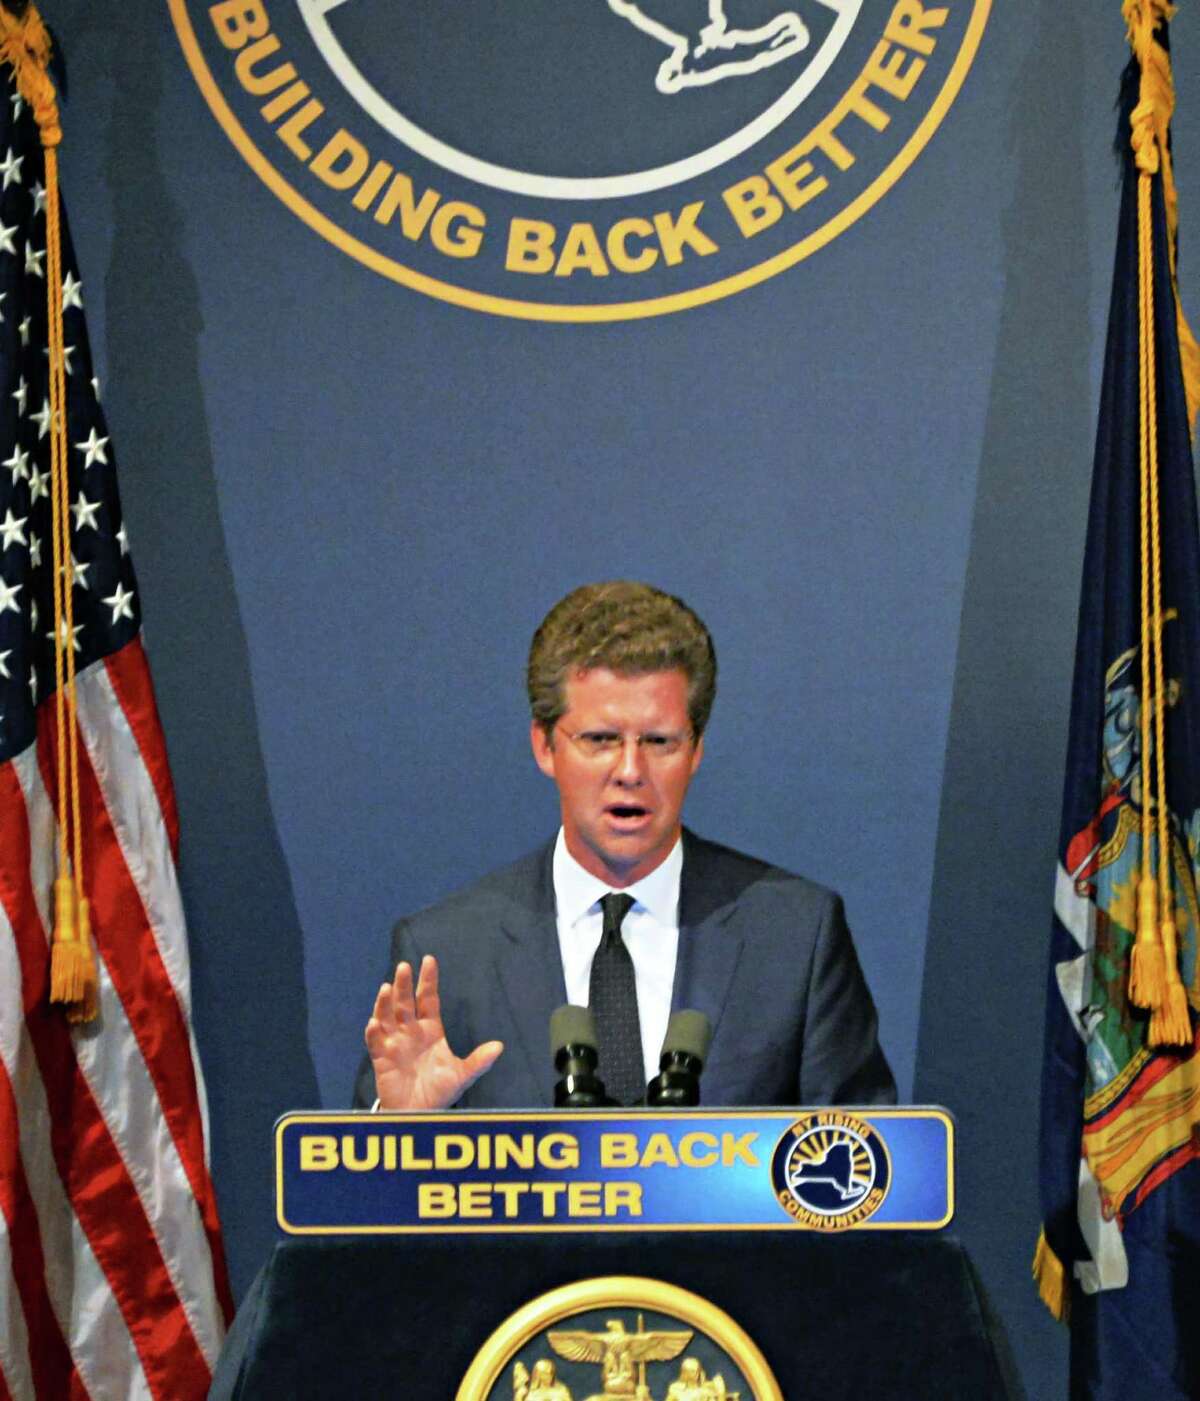 HUD Secretary Shaun Donovan addresses the New York Rising Storm Recovery Conference in Albany, NY, Thursday July 18, 2013. (John Carl D'Annibale / Times Union)